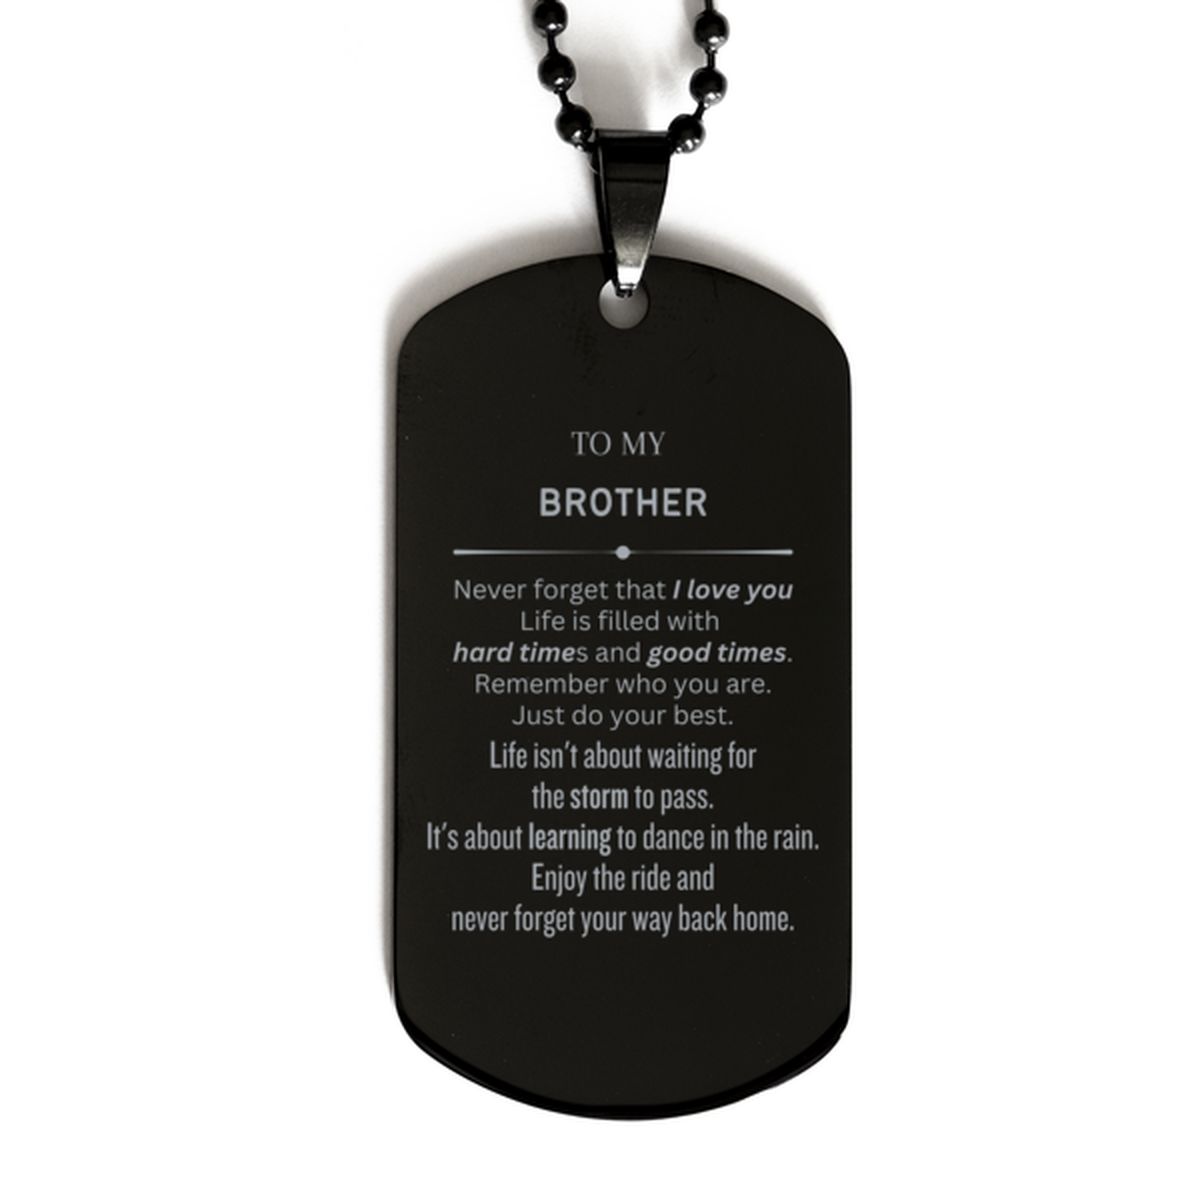 Christmas Brother Black Dog Tag Gifts, To My Brother Birthday Thank You Gifts For Brother, Graduation Unique Gifts For Brother To My Brother Never forget that I love you life is filled with hard times and good times. Remember who you are. Just do your bes